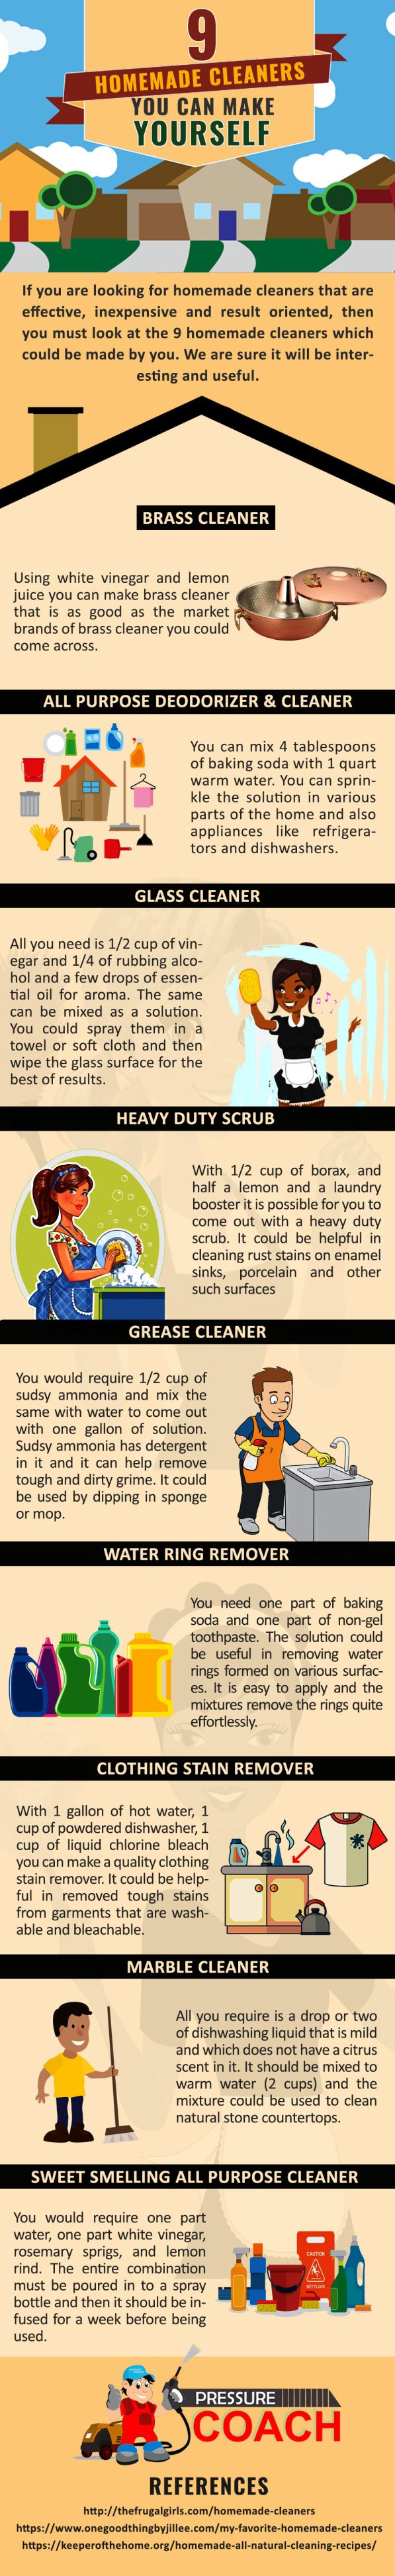 homemade cleaners infographic